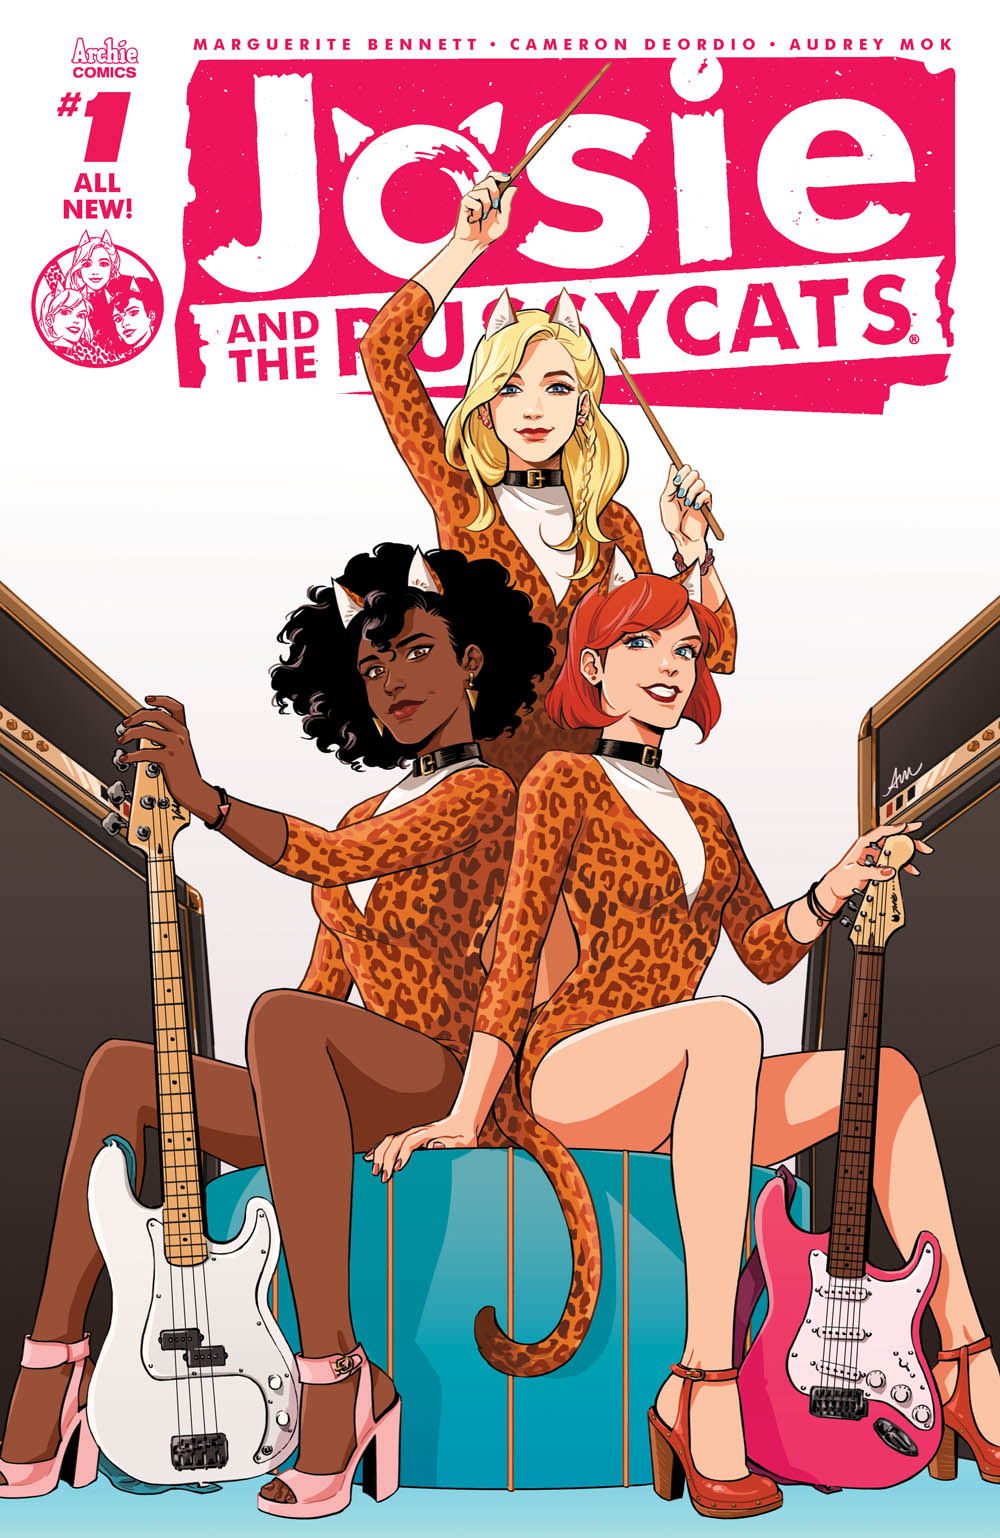 Josie and the pussycats comics